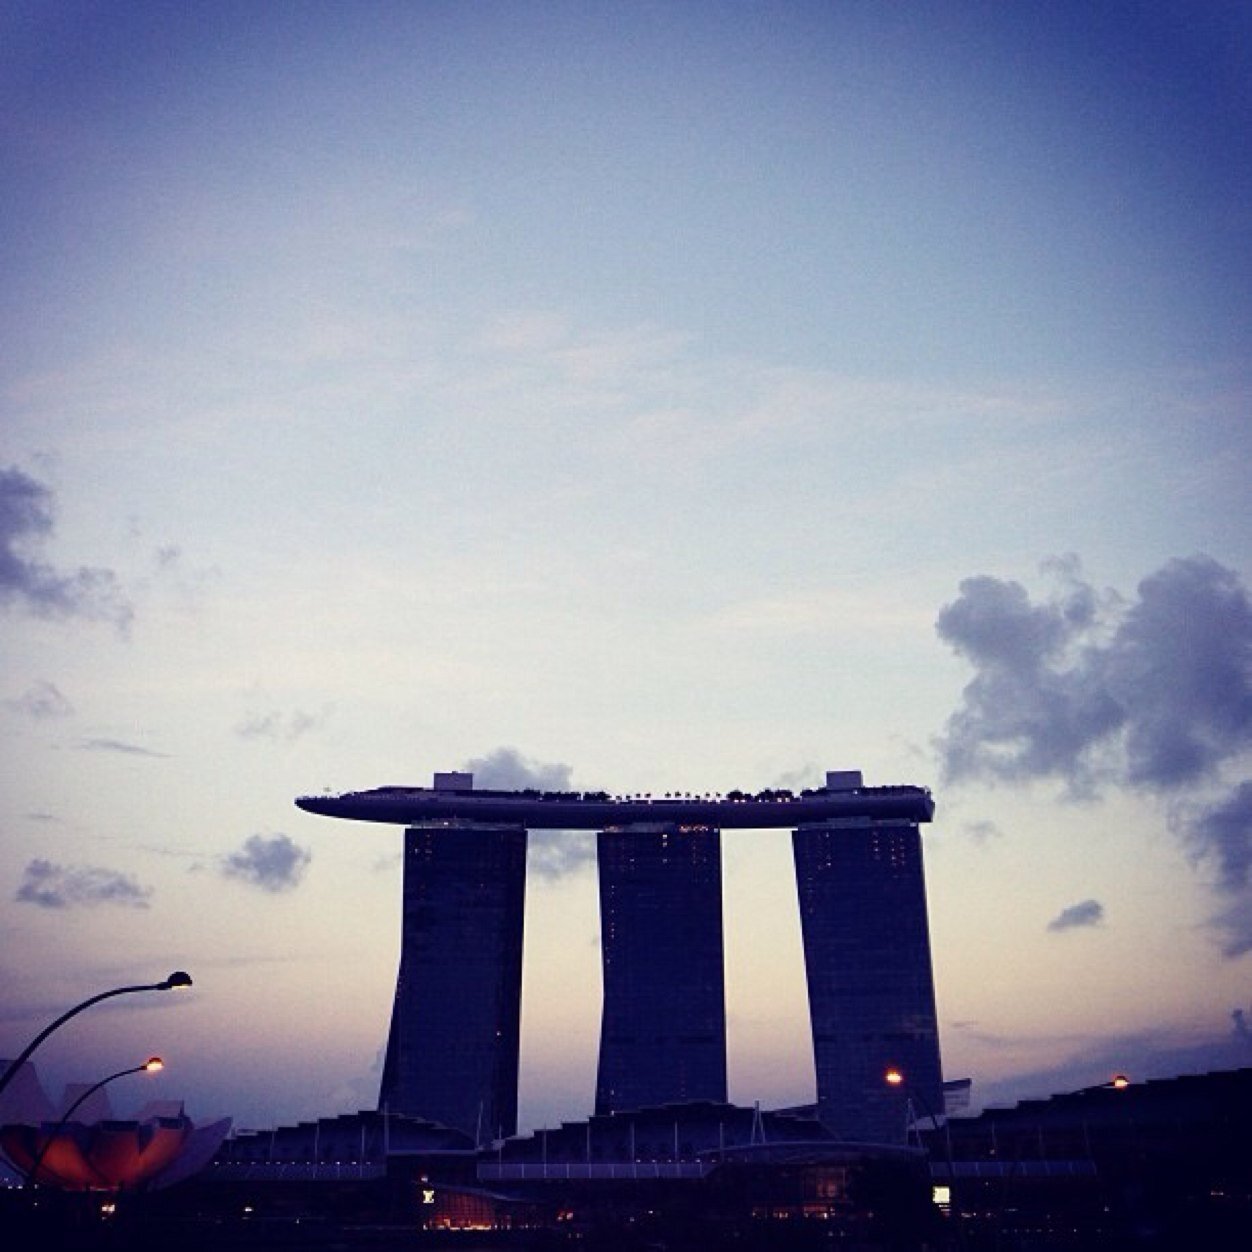 Happening Singapore is a insider's guide to Singapore arts, food, and happenings! 
http://t.co/wIOC6SO5